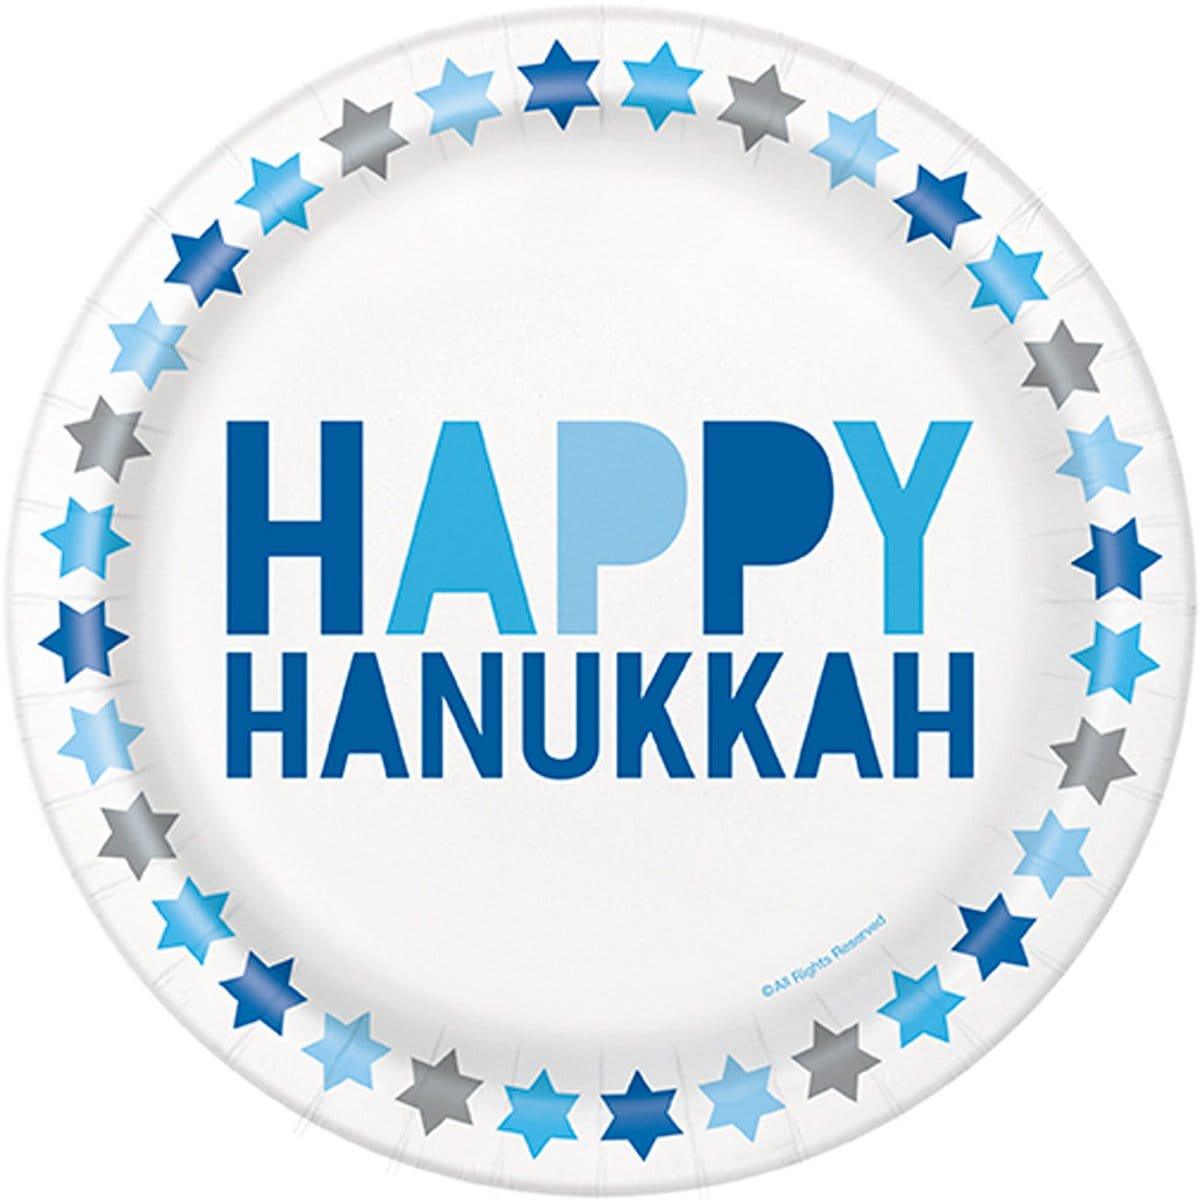 Buy Hanukkah Starry Hanukkah paper plates 7 inches, 8 per package sold at Party Expert